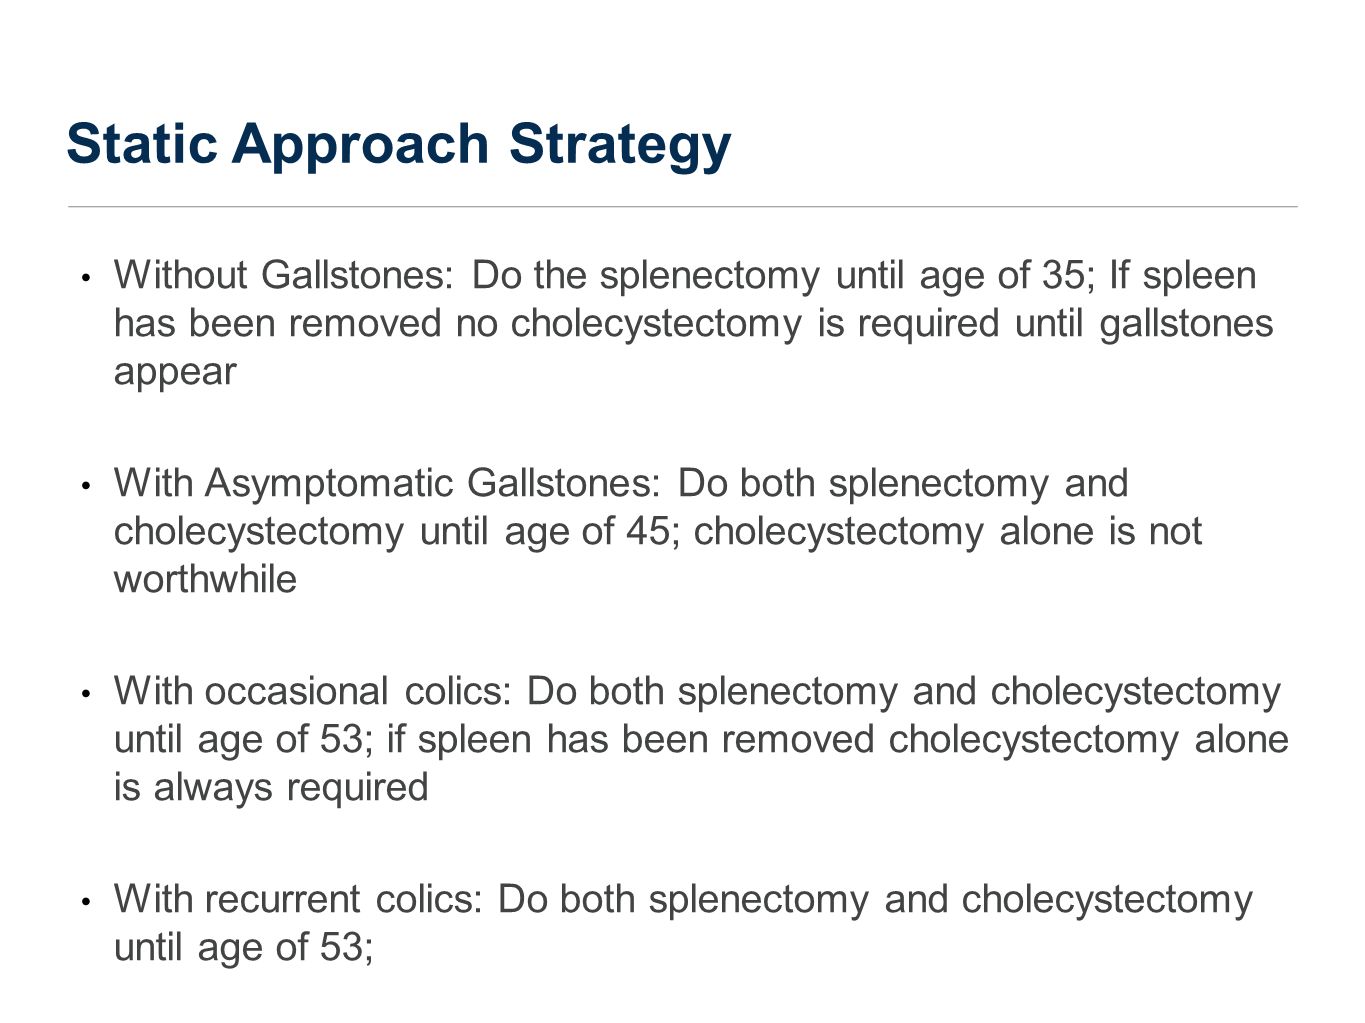 Static Approach Strategy Without Gallstones: Do the splenectomy until age of 35; If spleen has been removed no cholecystectomy is required until gallstones appear With Asymptomatic Gallstones: Do both splenectomy and cholecystectomy until age of 45; cholecystectomy alone is not worthwhile With occasional colics: Do both splenectomy and cholecystectomy until age of 53; if spleen has been removed cholecystectomy alone is always required With recurrent colics: Do both splenectomy and cholecystectomy until age of 53;